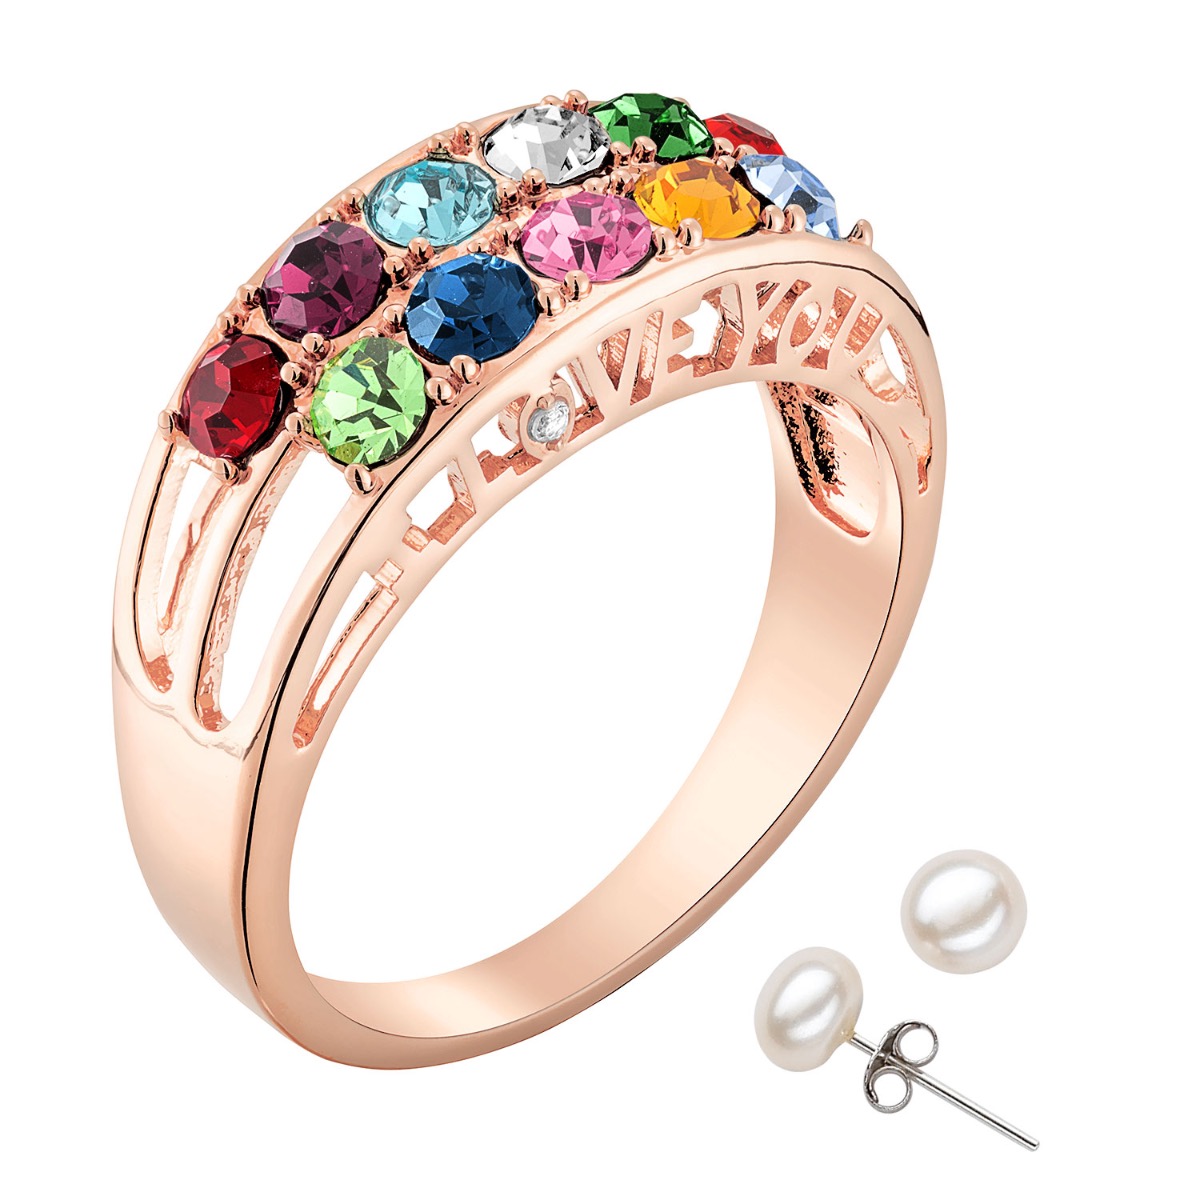 14K Rose Gold Plated I Love You Family Birthstone and Diamond Accent Ring with Free Pearl Earrings - Pierced